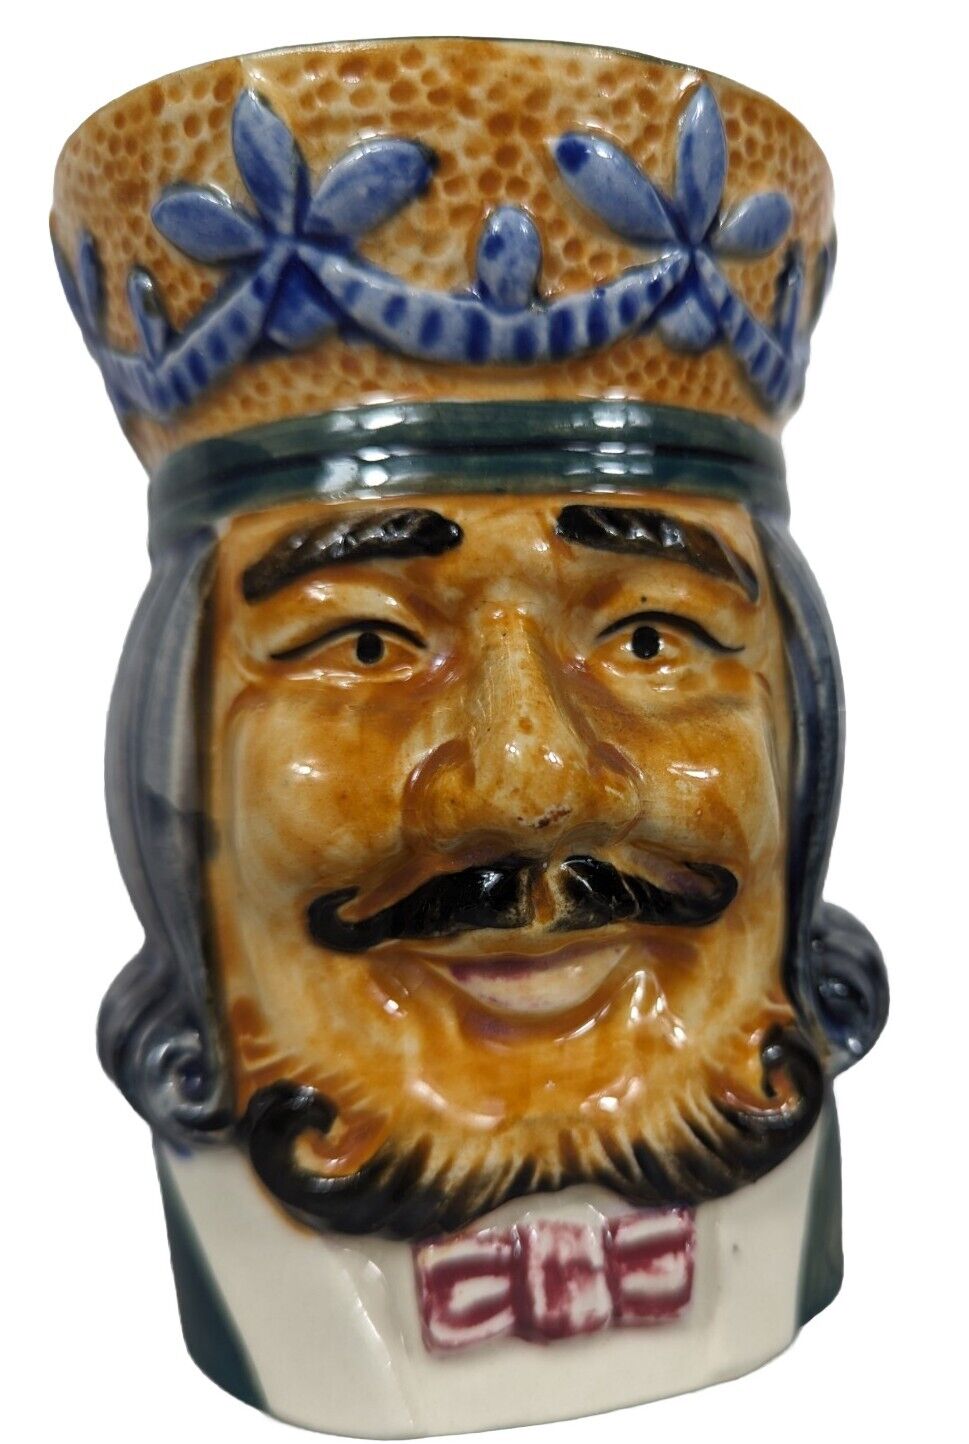 Vintage Occupied Japan Man with Mustache Ceramic Toby Style Mug Cup